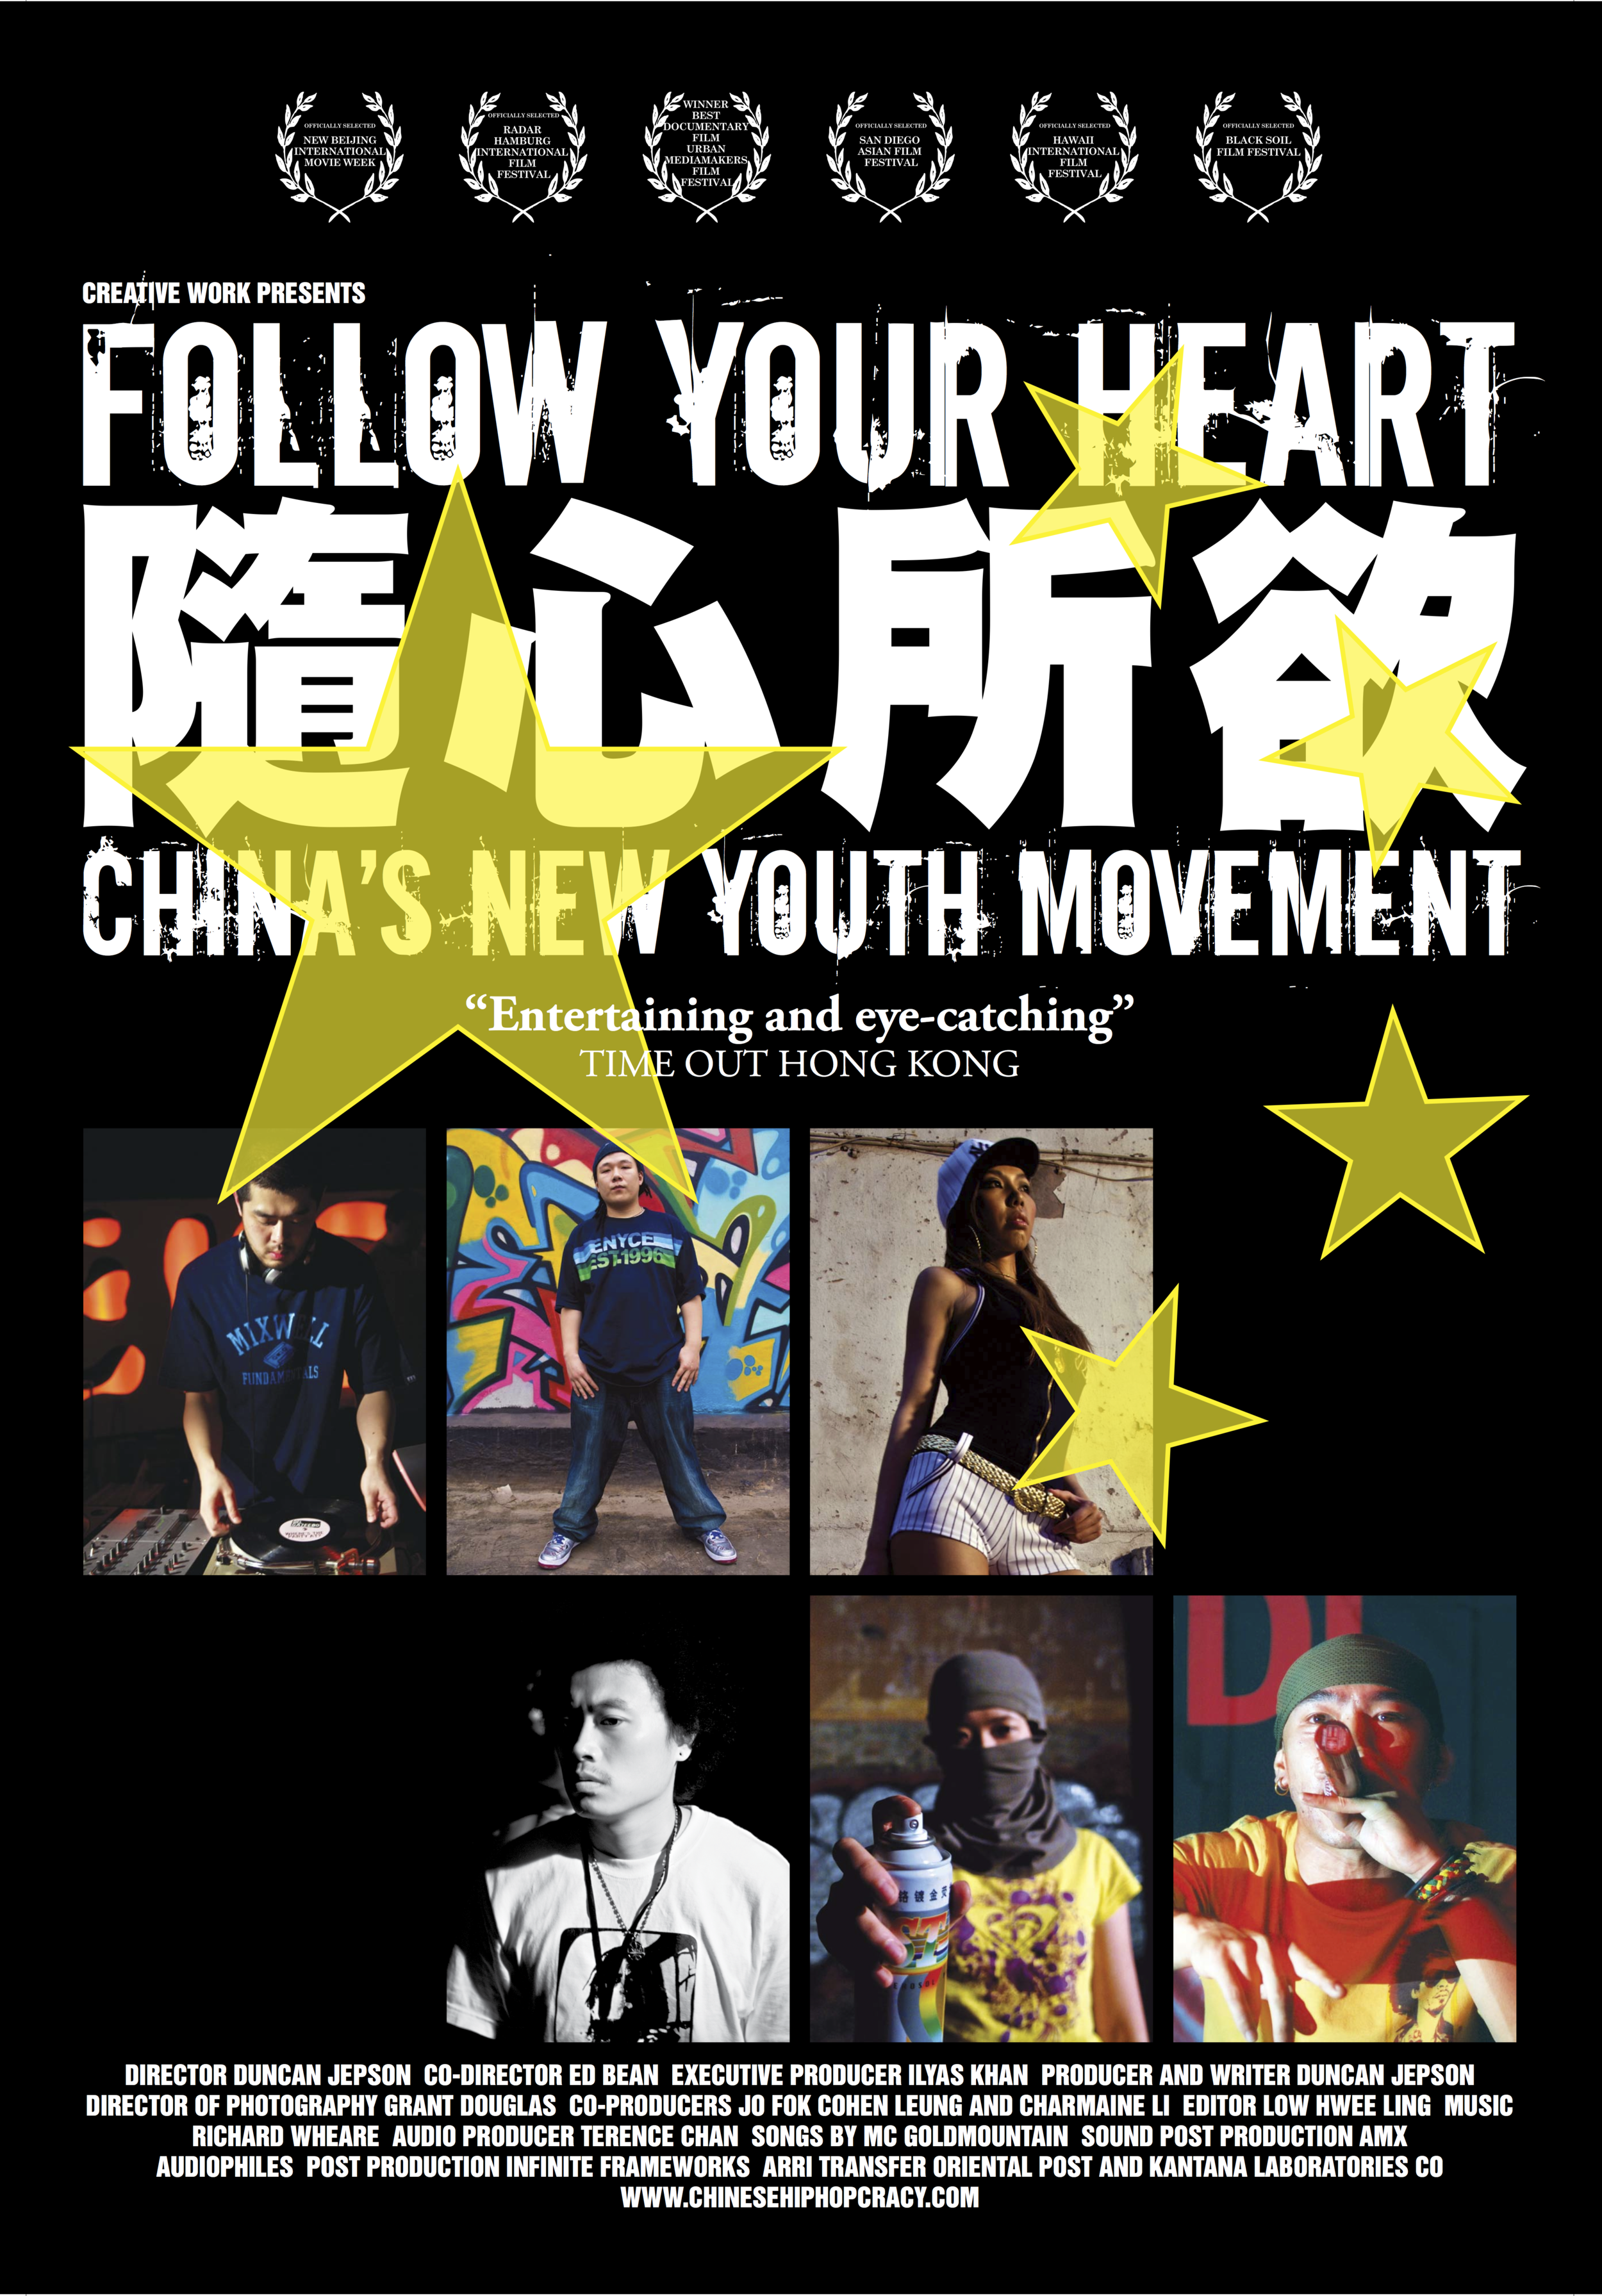 Follow Your Heart- China's New Youth Movement